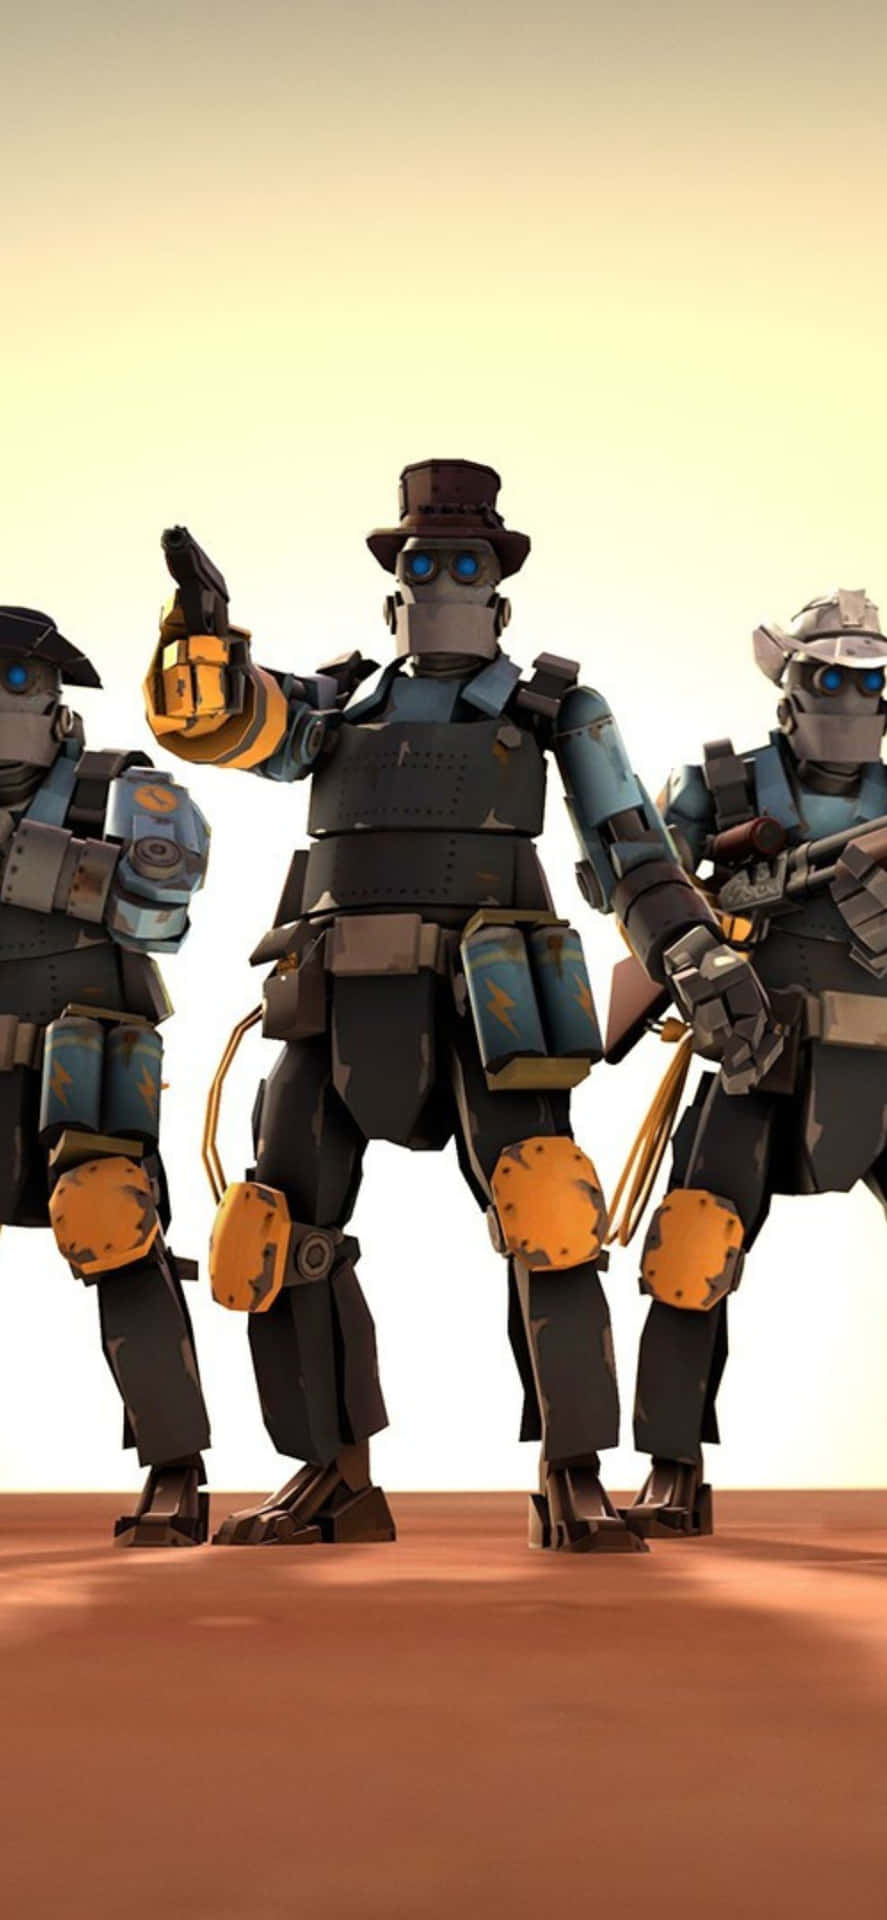 iPhone XS Team Fortress 2 Cowboy Robots Background